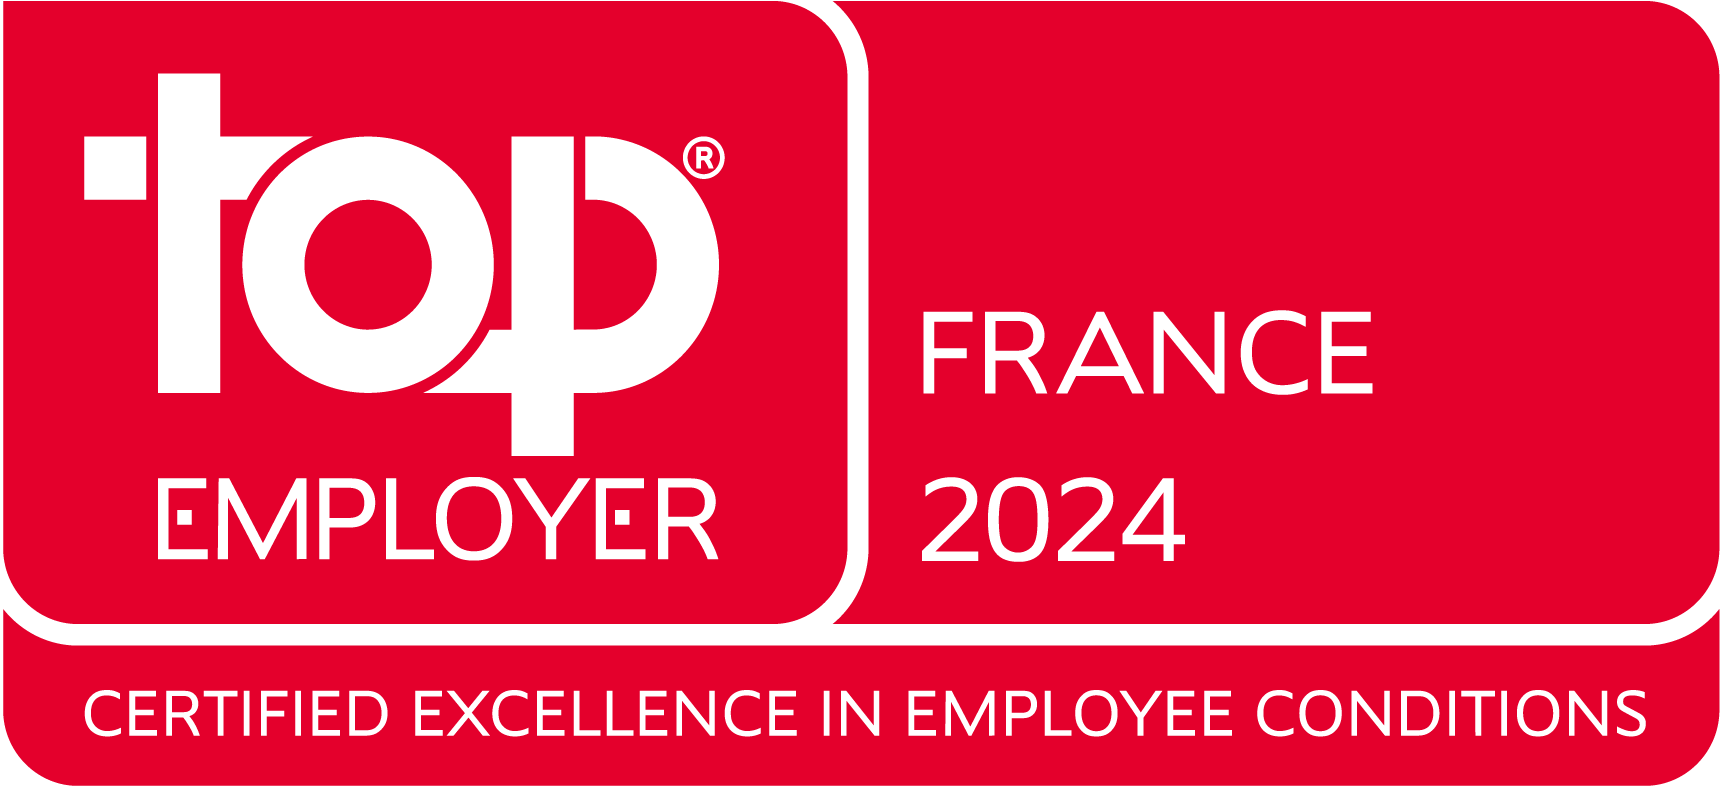 Top_Employer_France_2024.png